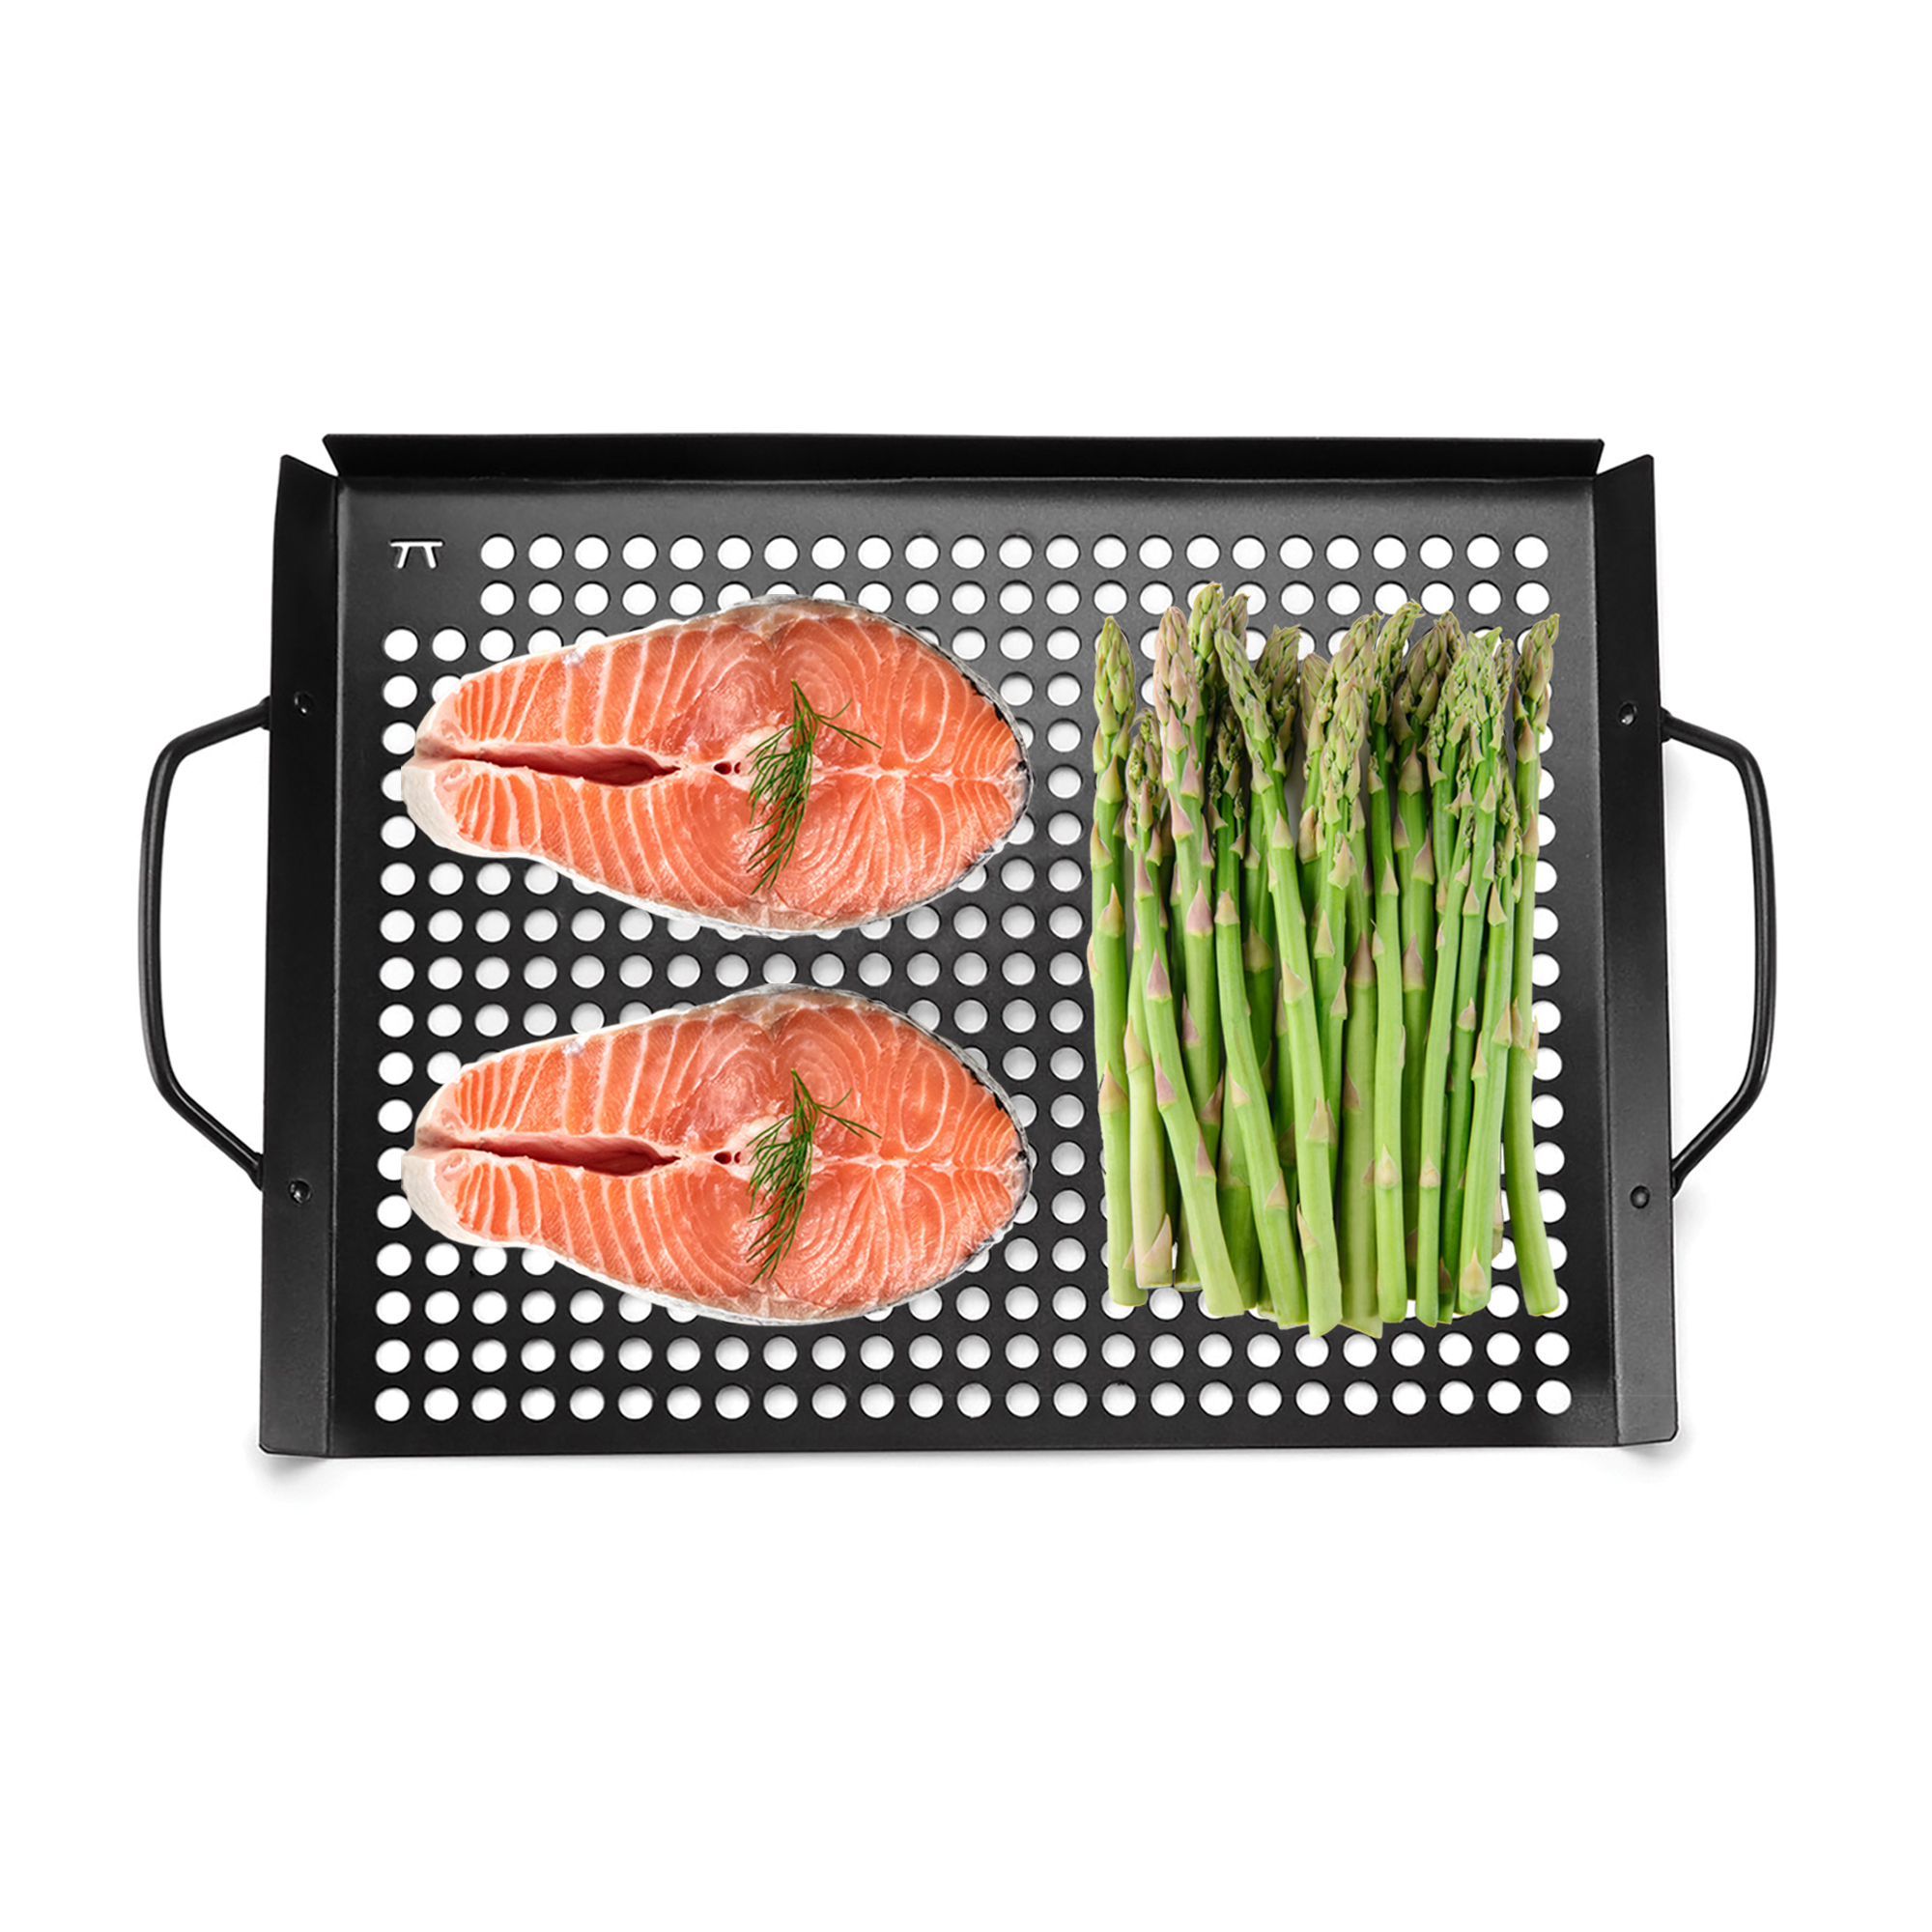 Outset 17 X 11 Black Non-Stick Large Grill Grid - image 5 of 7